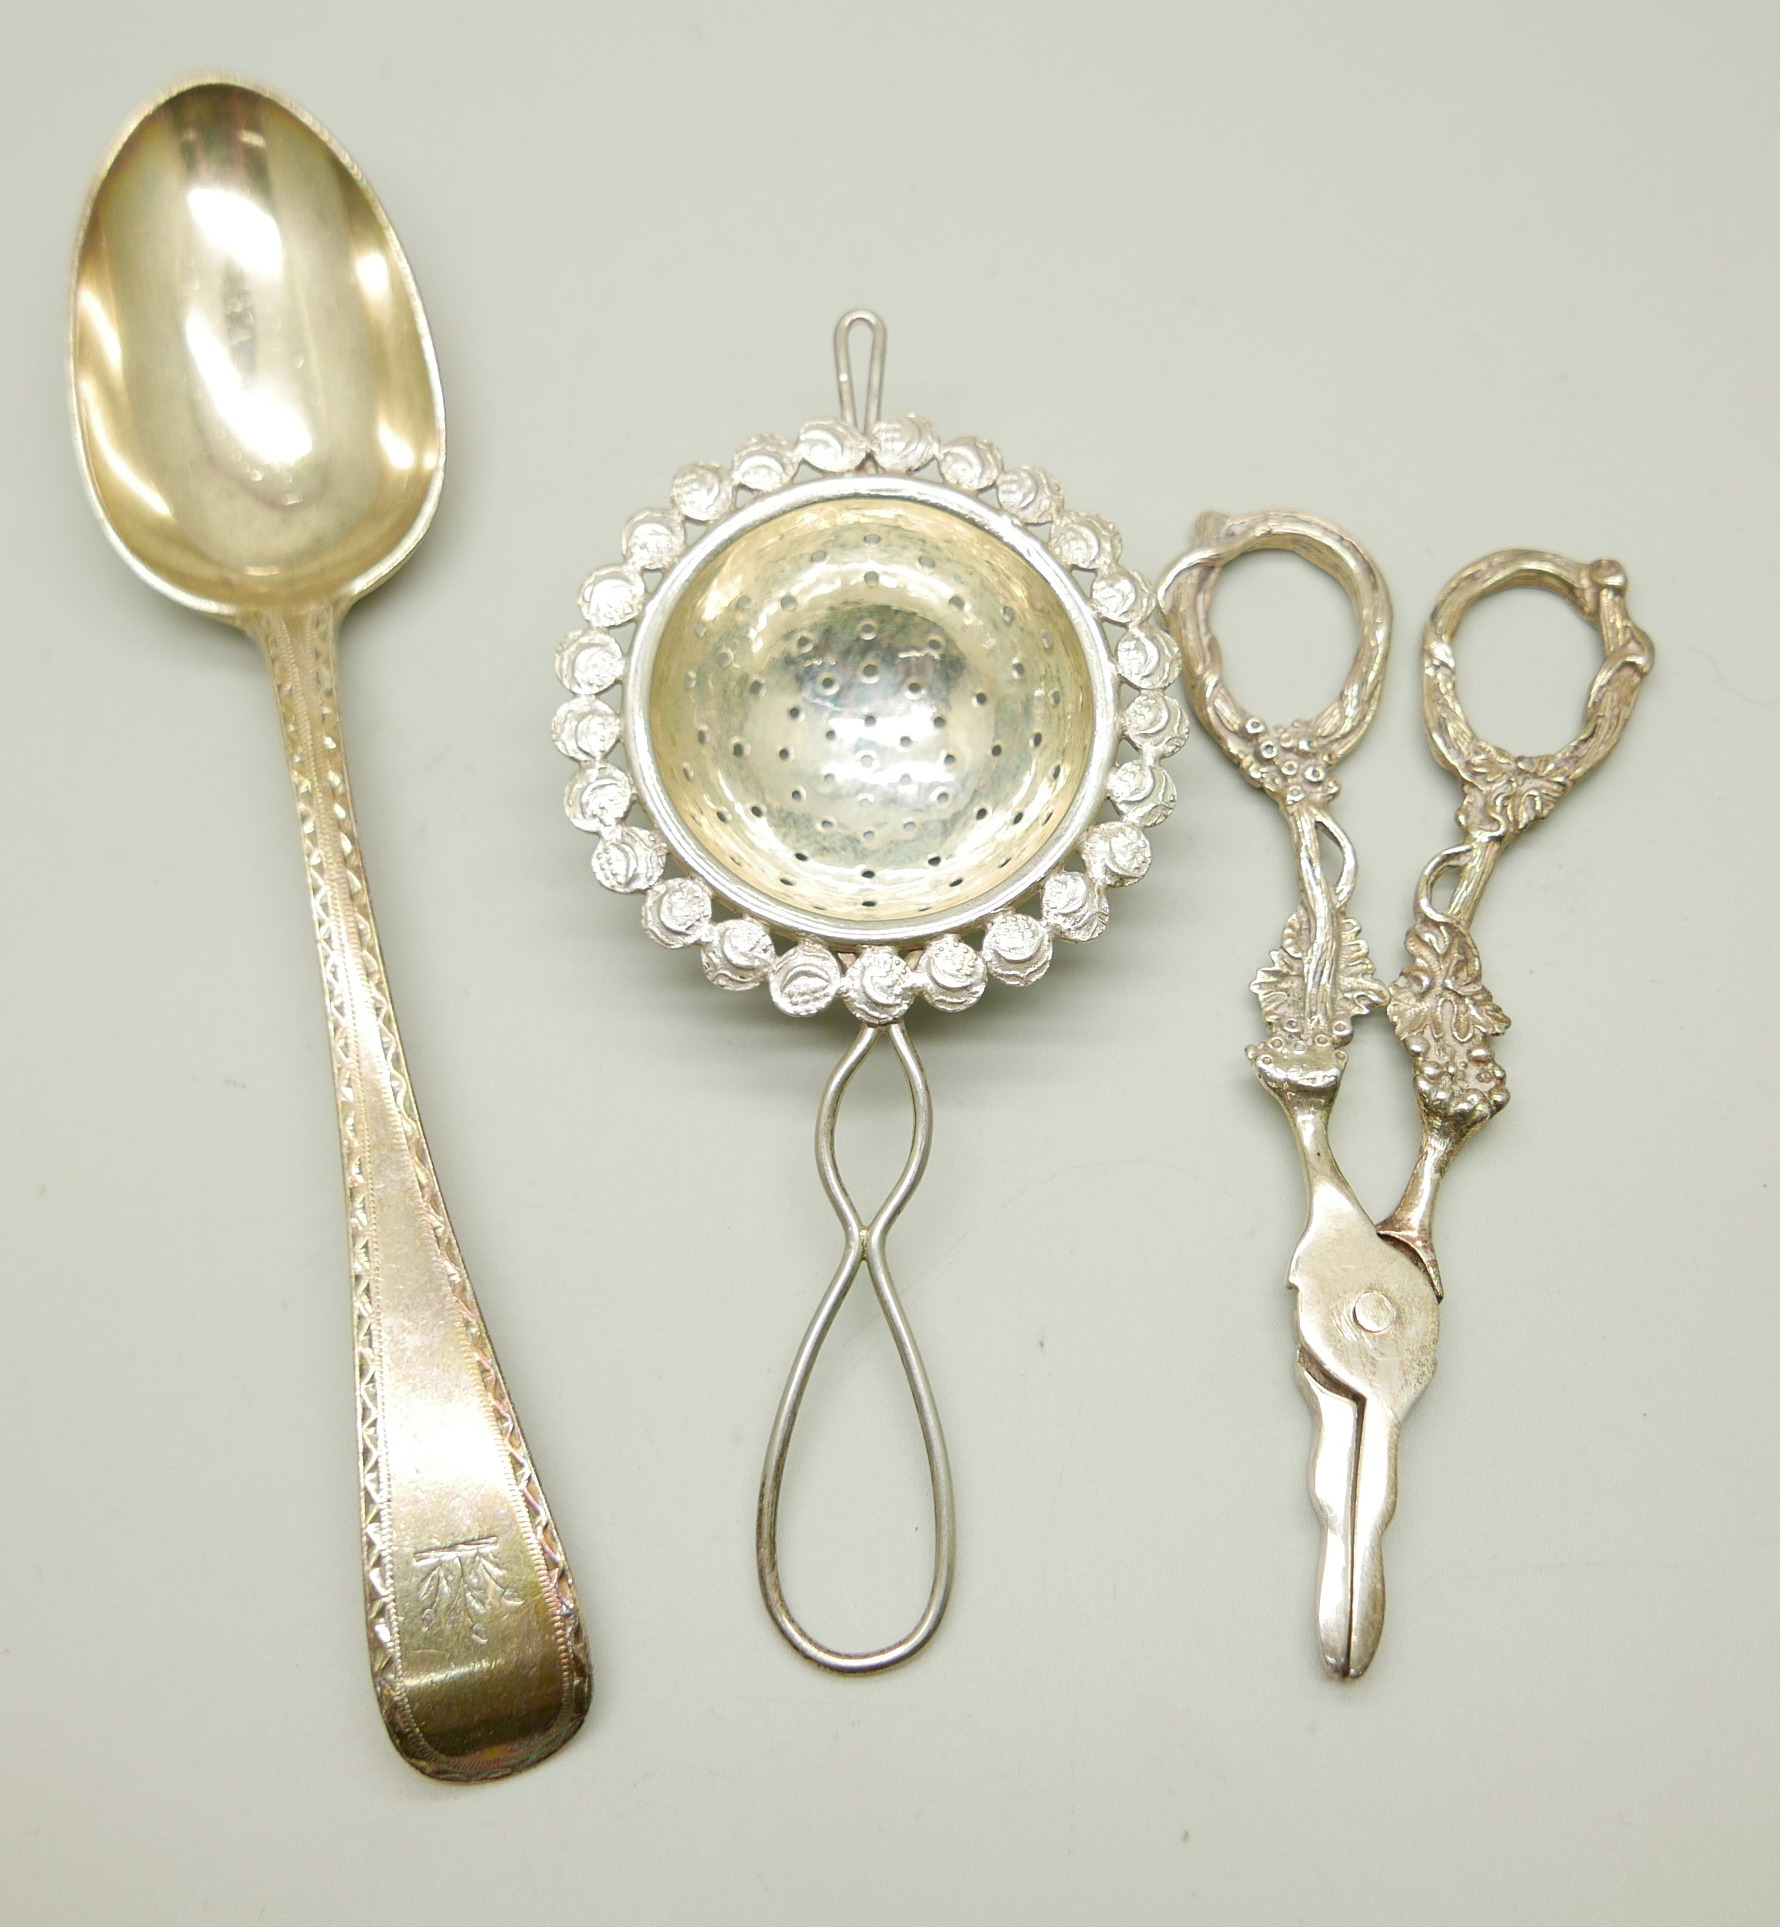 A Victorian silver spoon by George Adams, a strainer and a pair of silver grape scissors, (spoon and